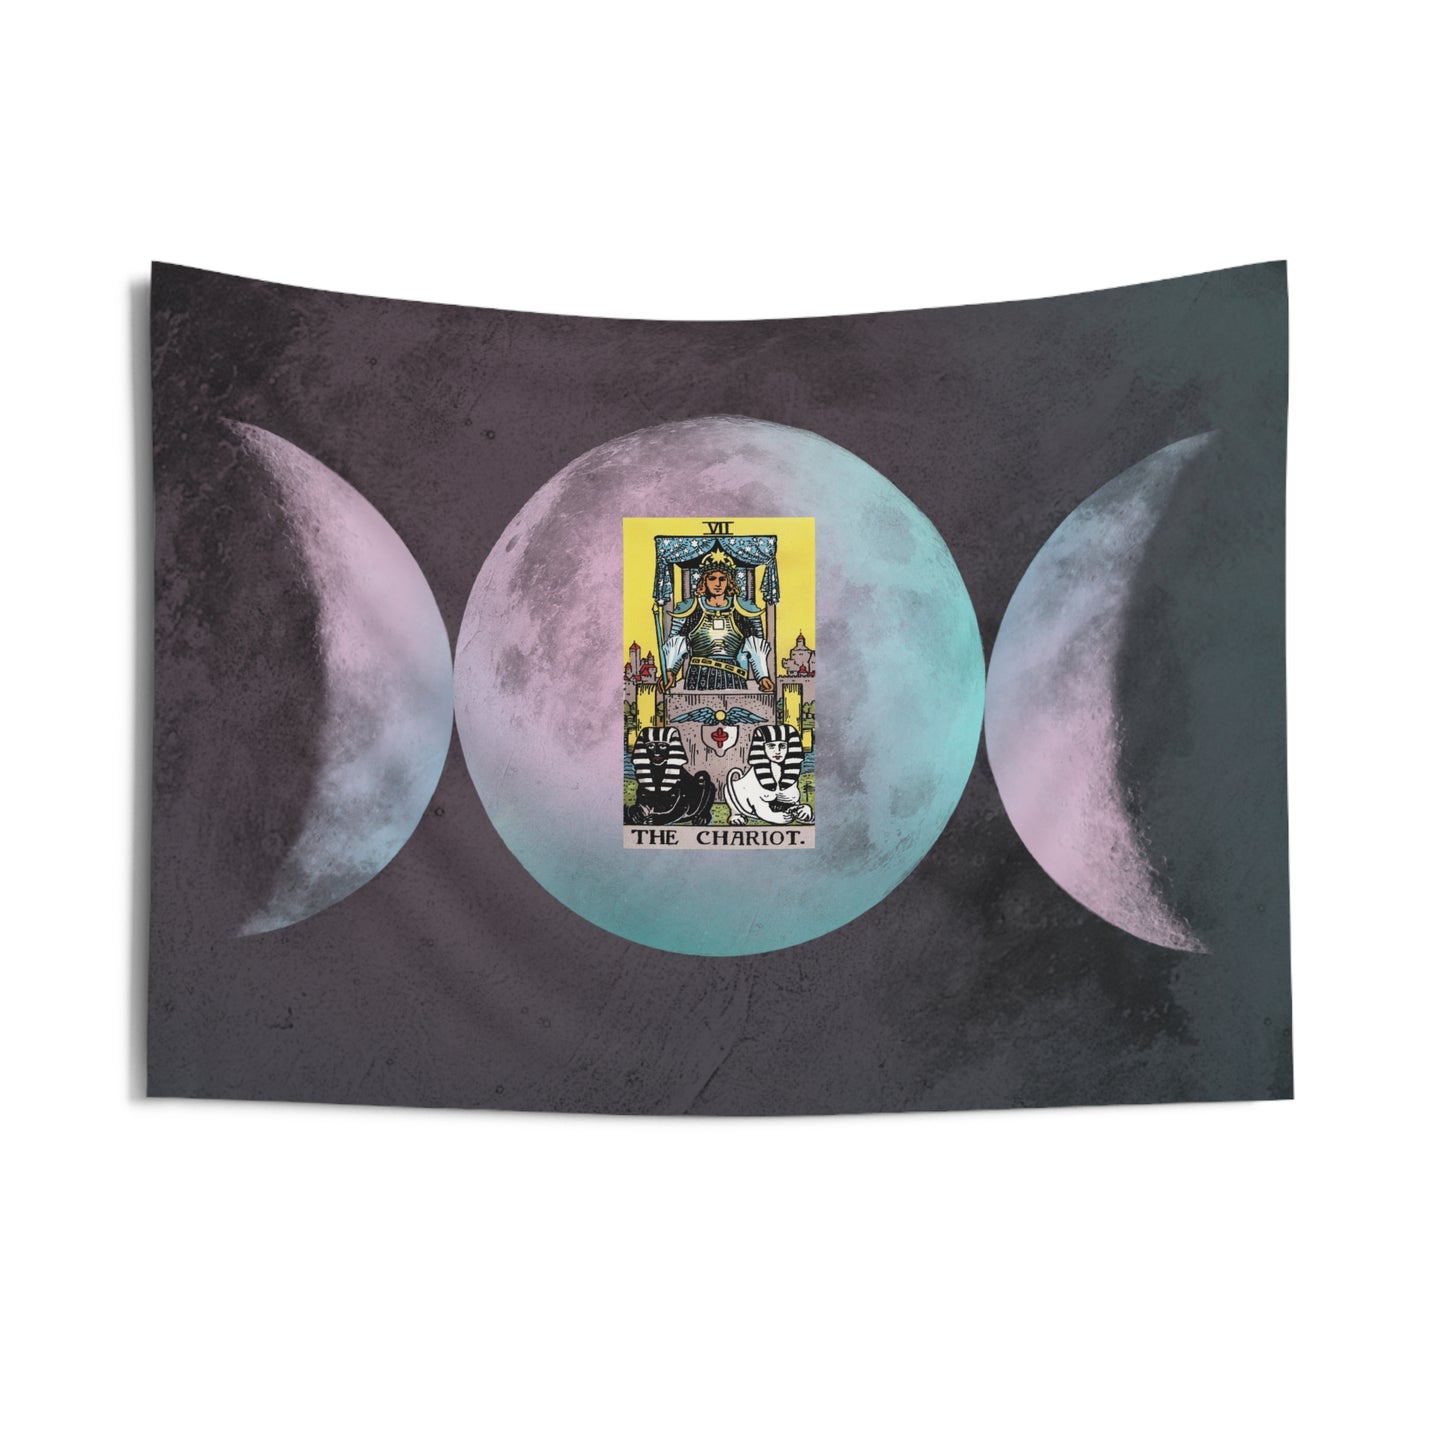 The Chariot Tarot Card Altar Cloth or Tapestry with Triple Goddess Symbol